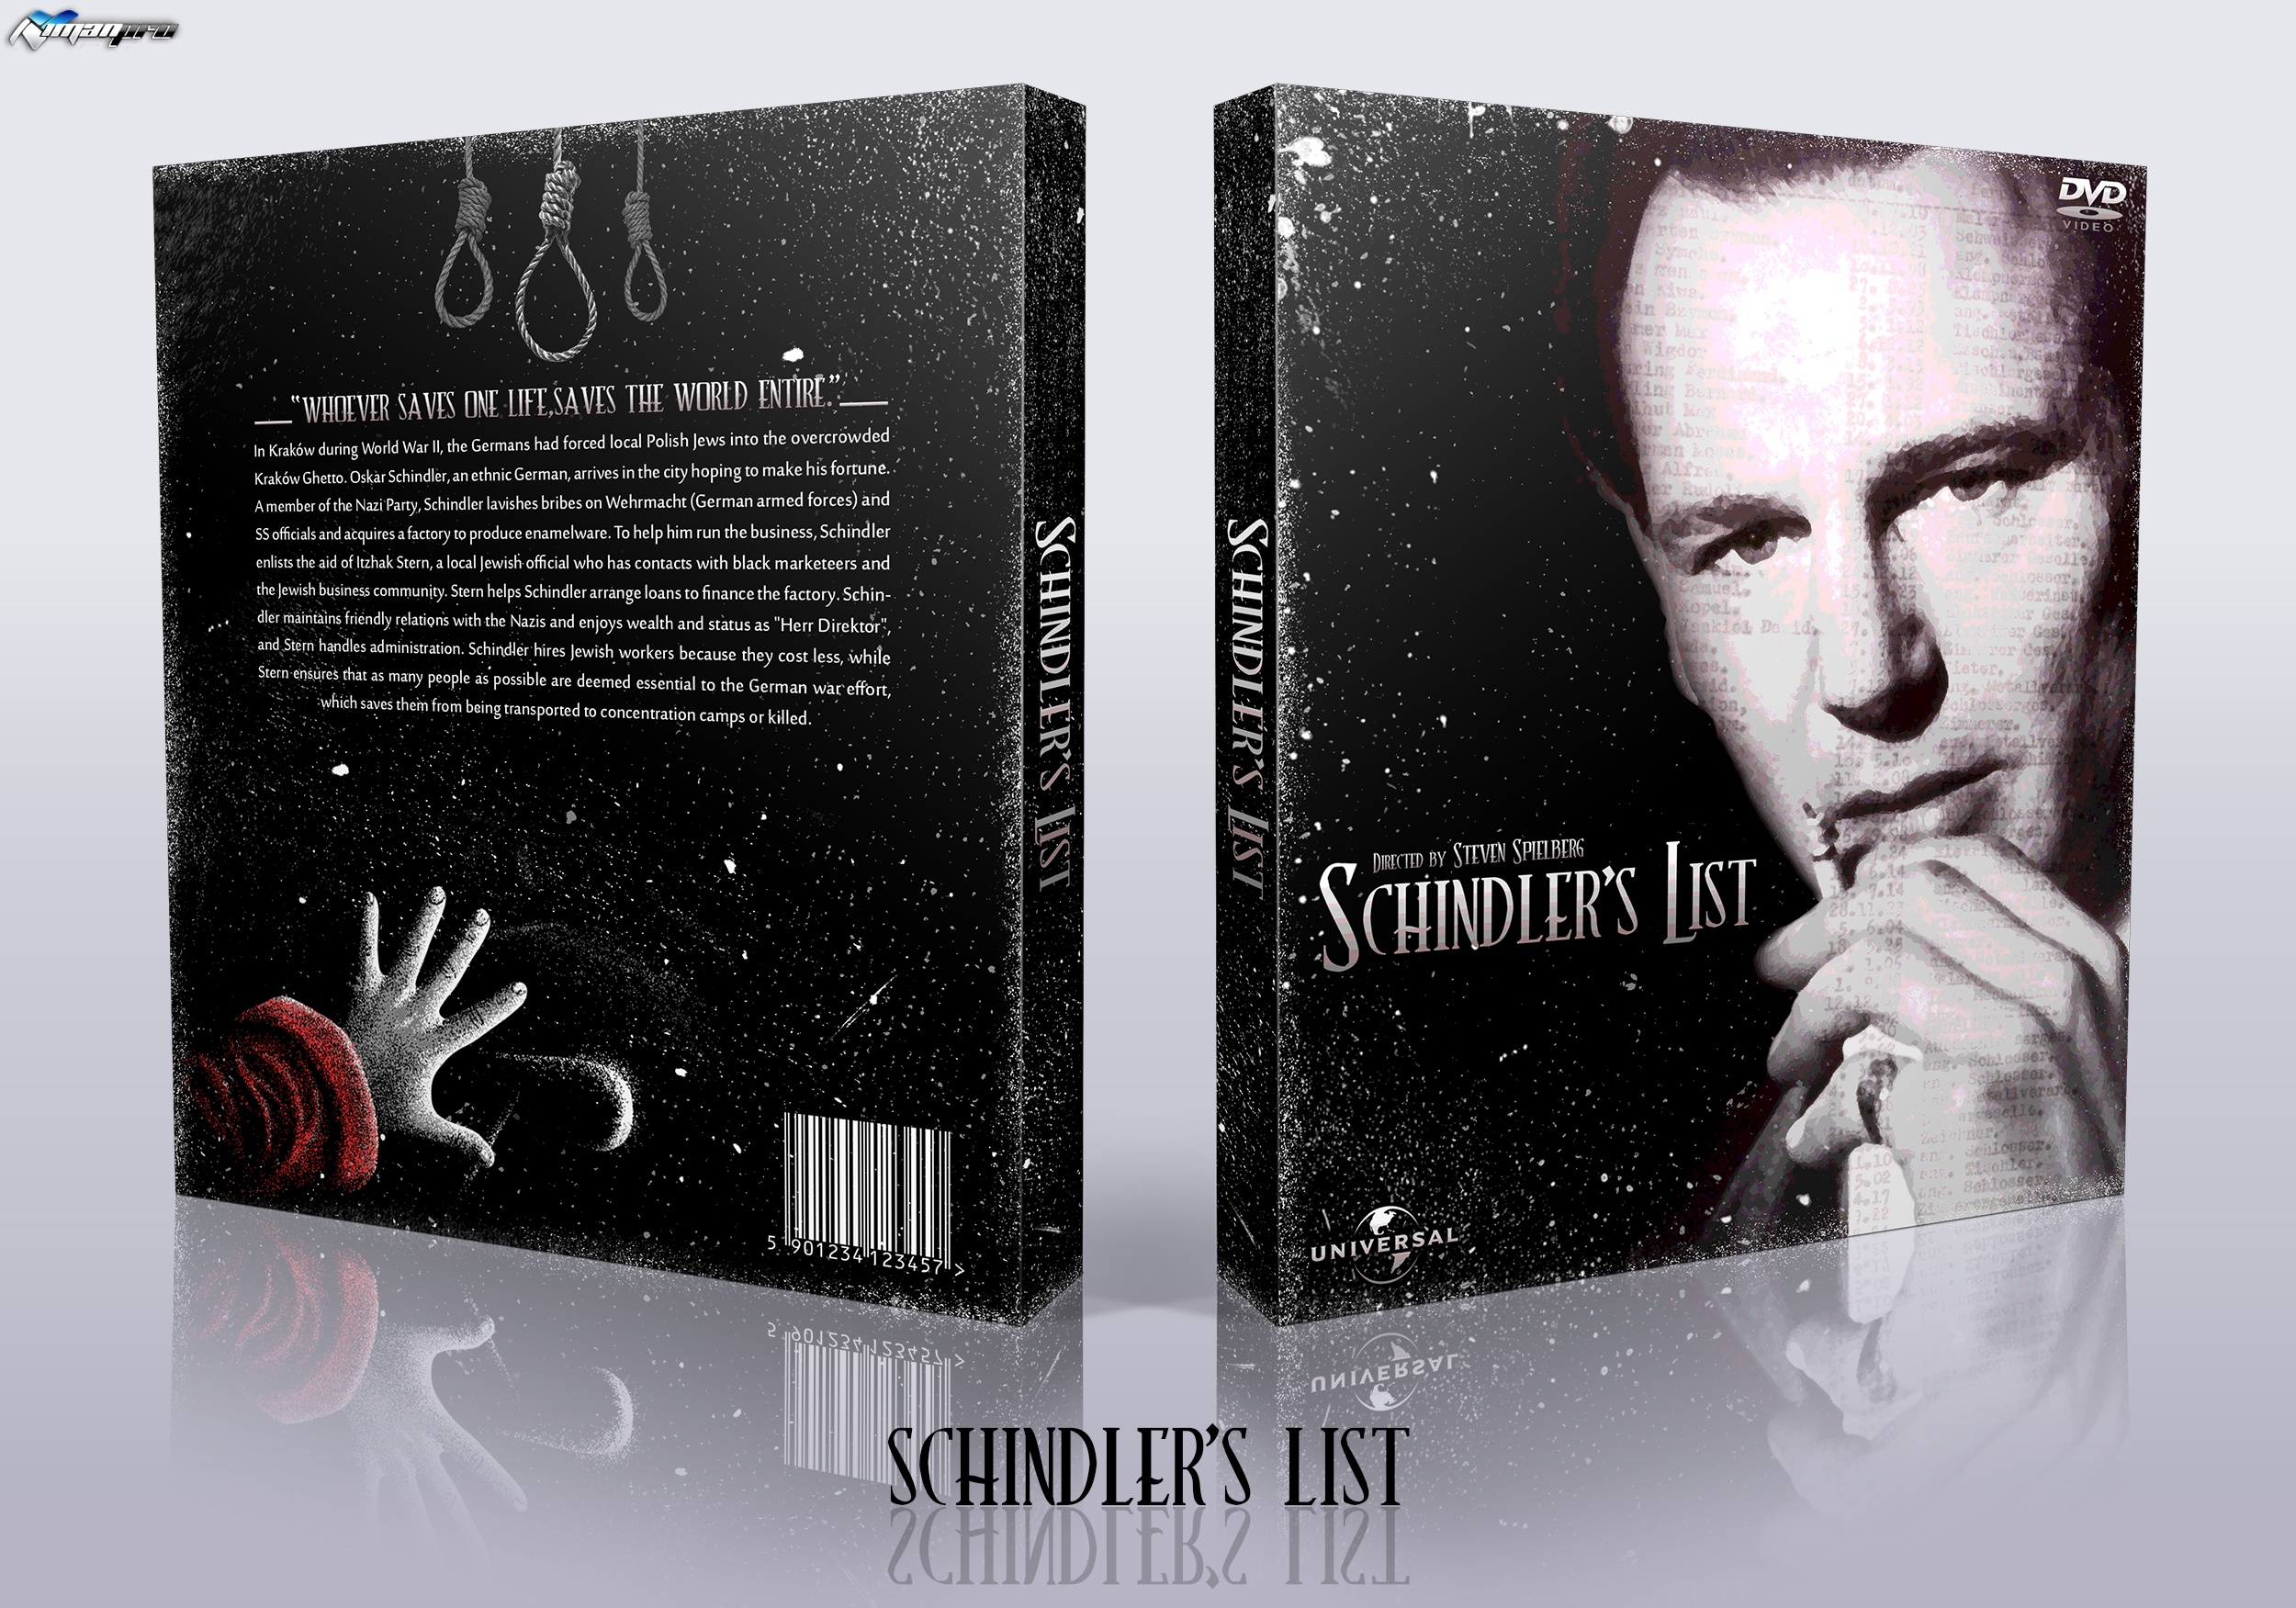 Schindler's List box cover